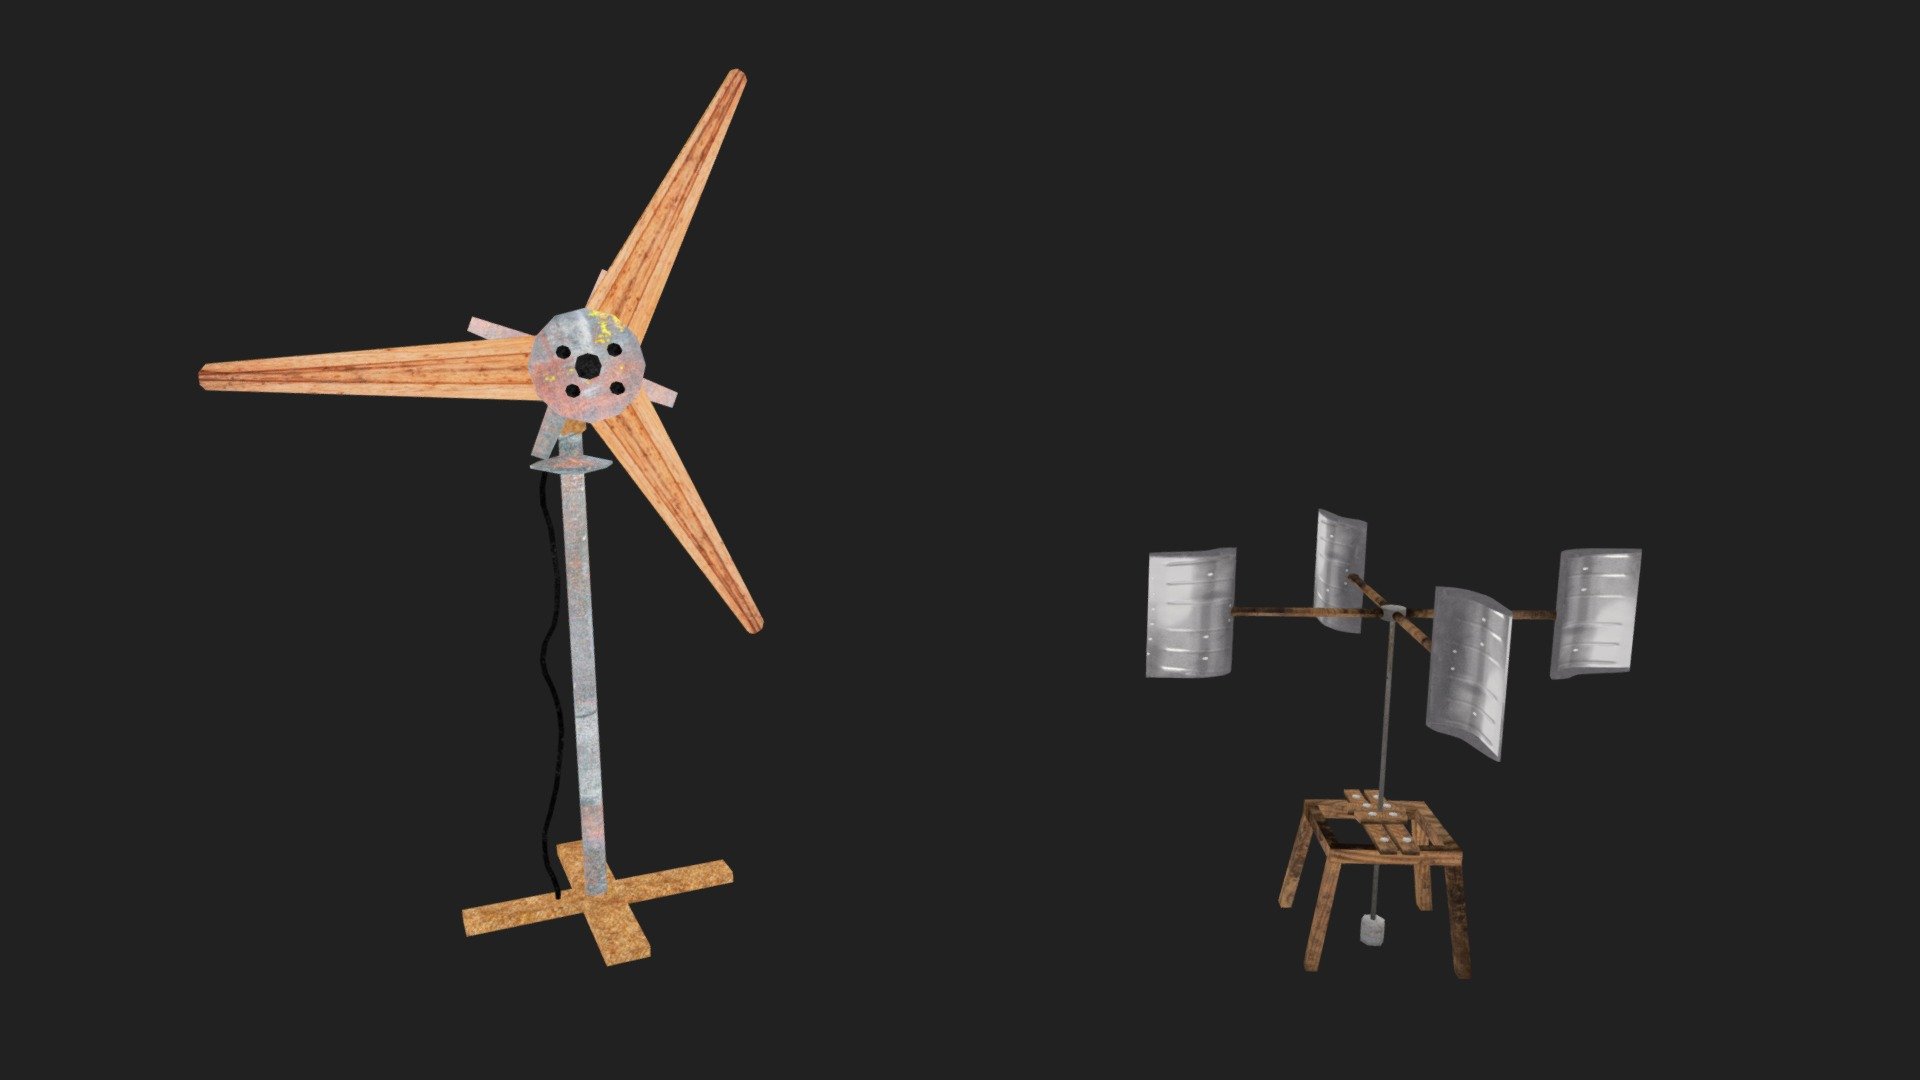 DIY windmills made from refuse for Unity 3D piece. Left windmill made from carburetor parts. Right windmill made from snow shovels 3d model